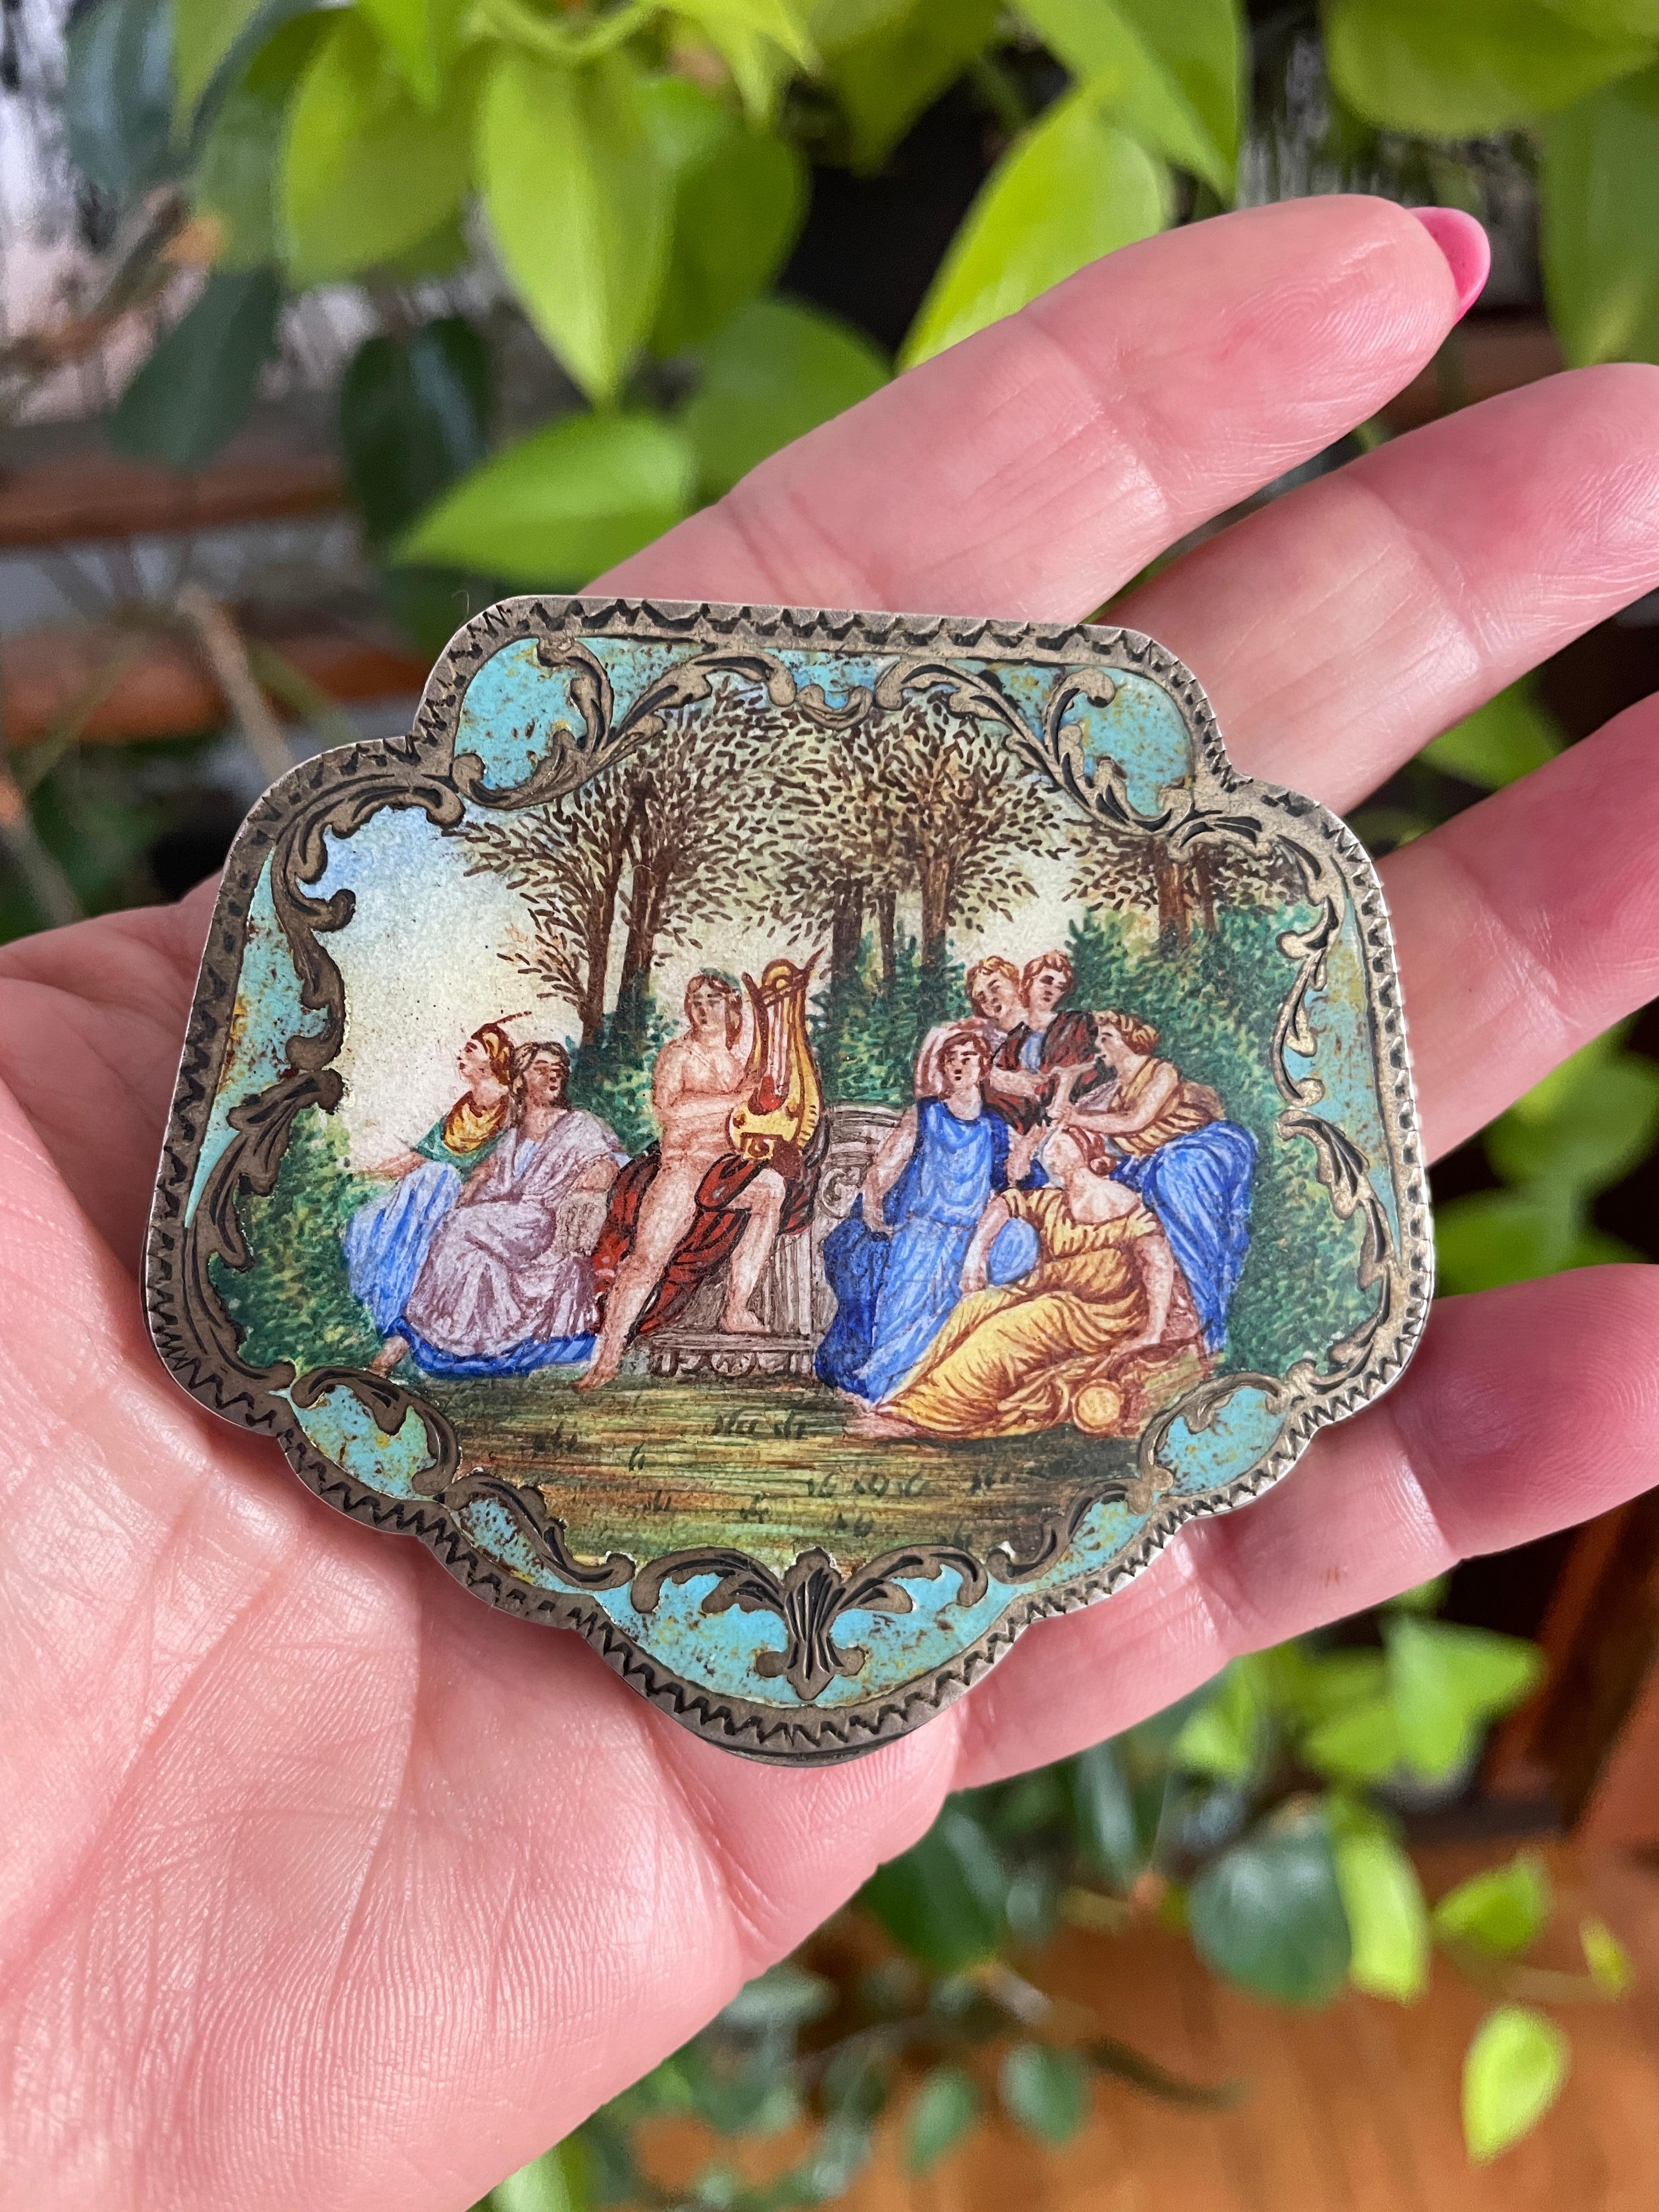 Antique Silver Enamel Figures in Garden Scene Compact .800 Silver. Miniature portrait depicting a group in a garden listening to music. A nude male playing an instrument. Measuring 3.05